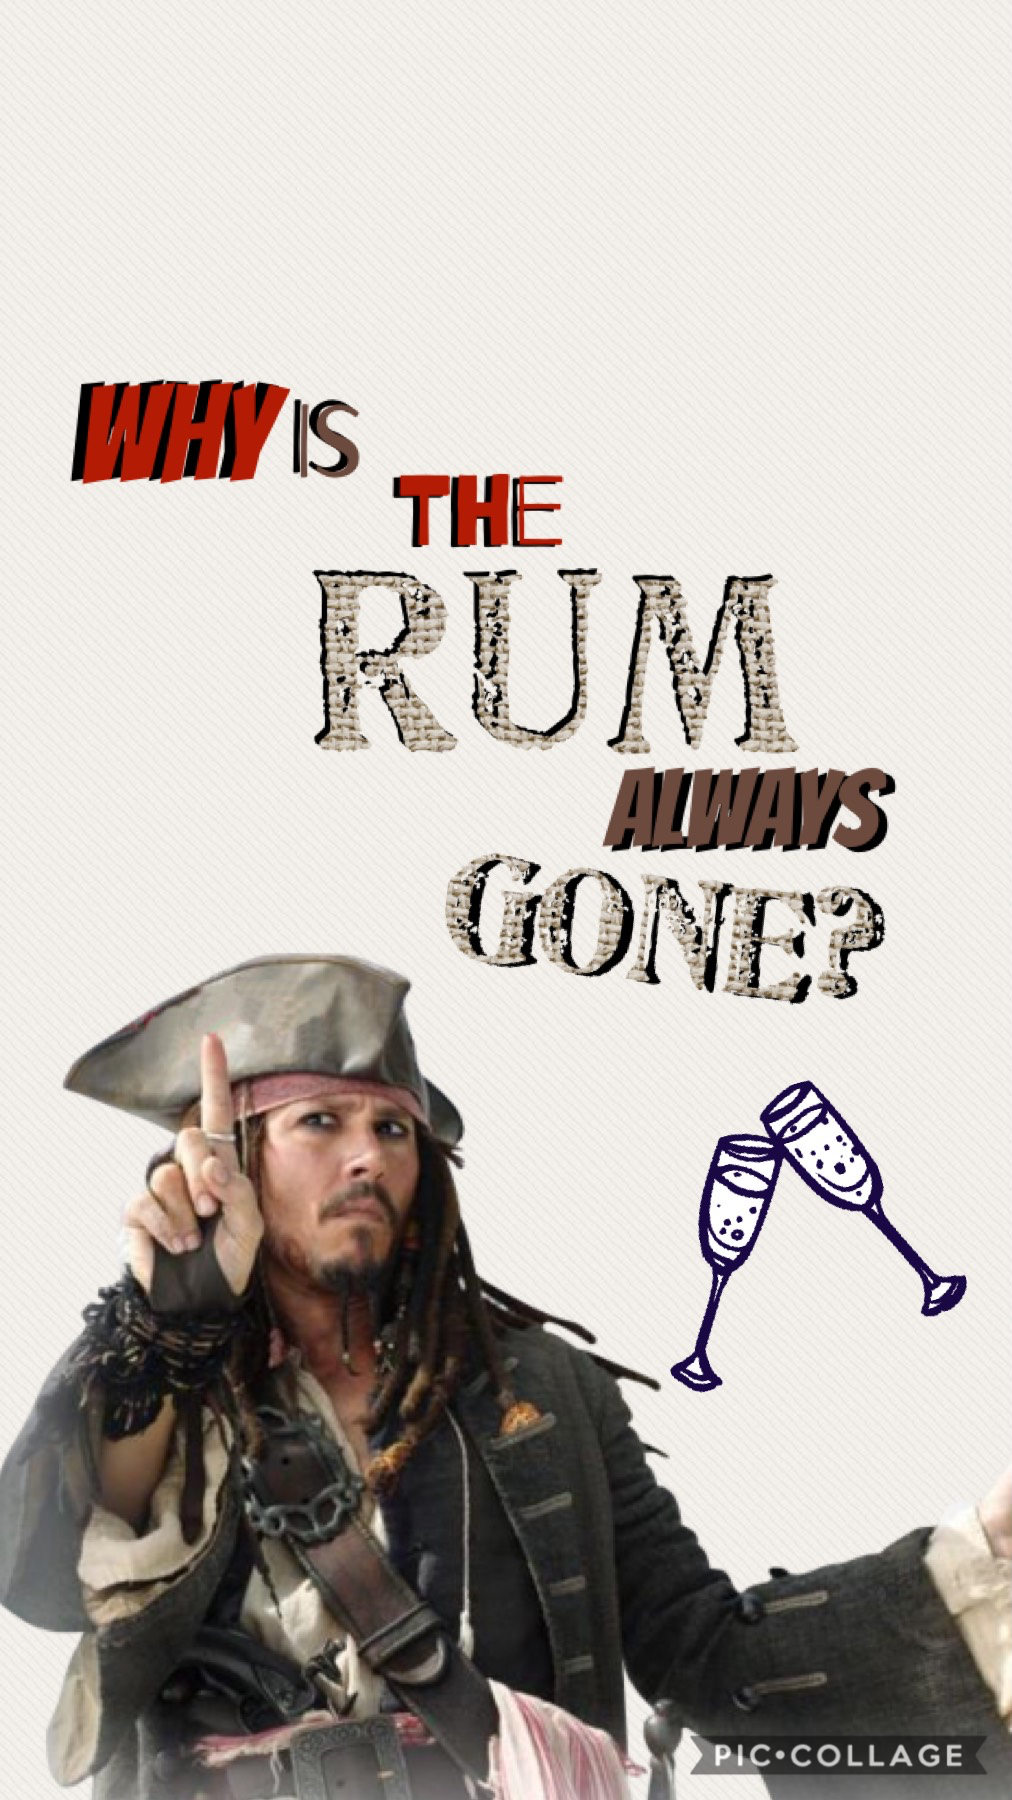 Captain Jack Sparrow 
(Just watched the movies and lived it!!)